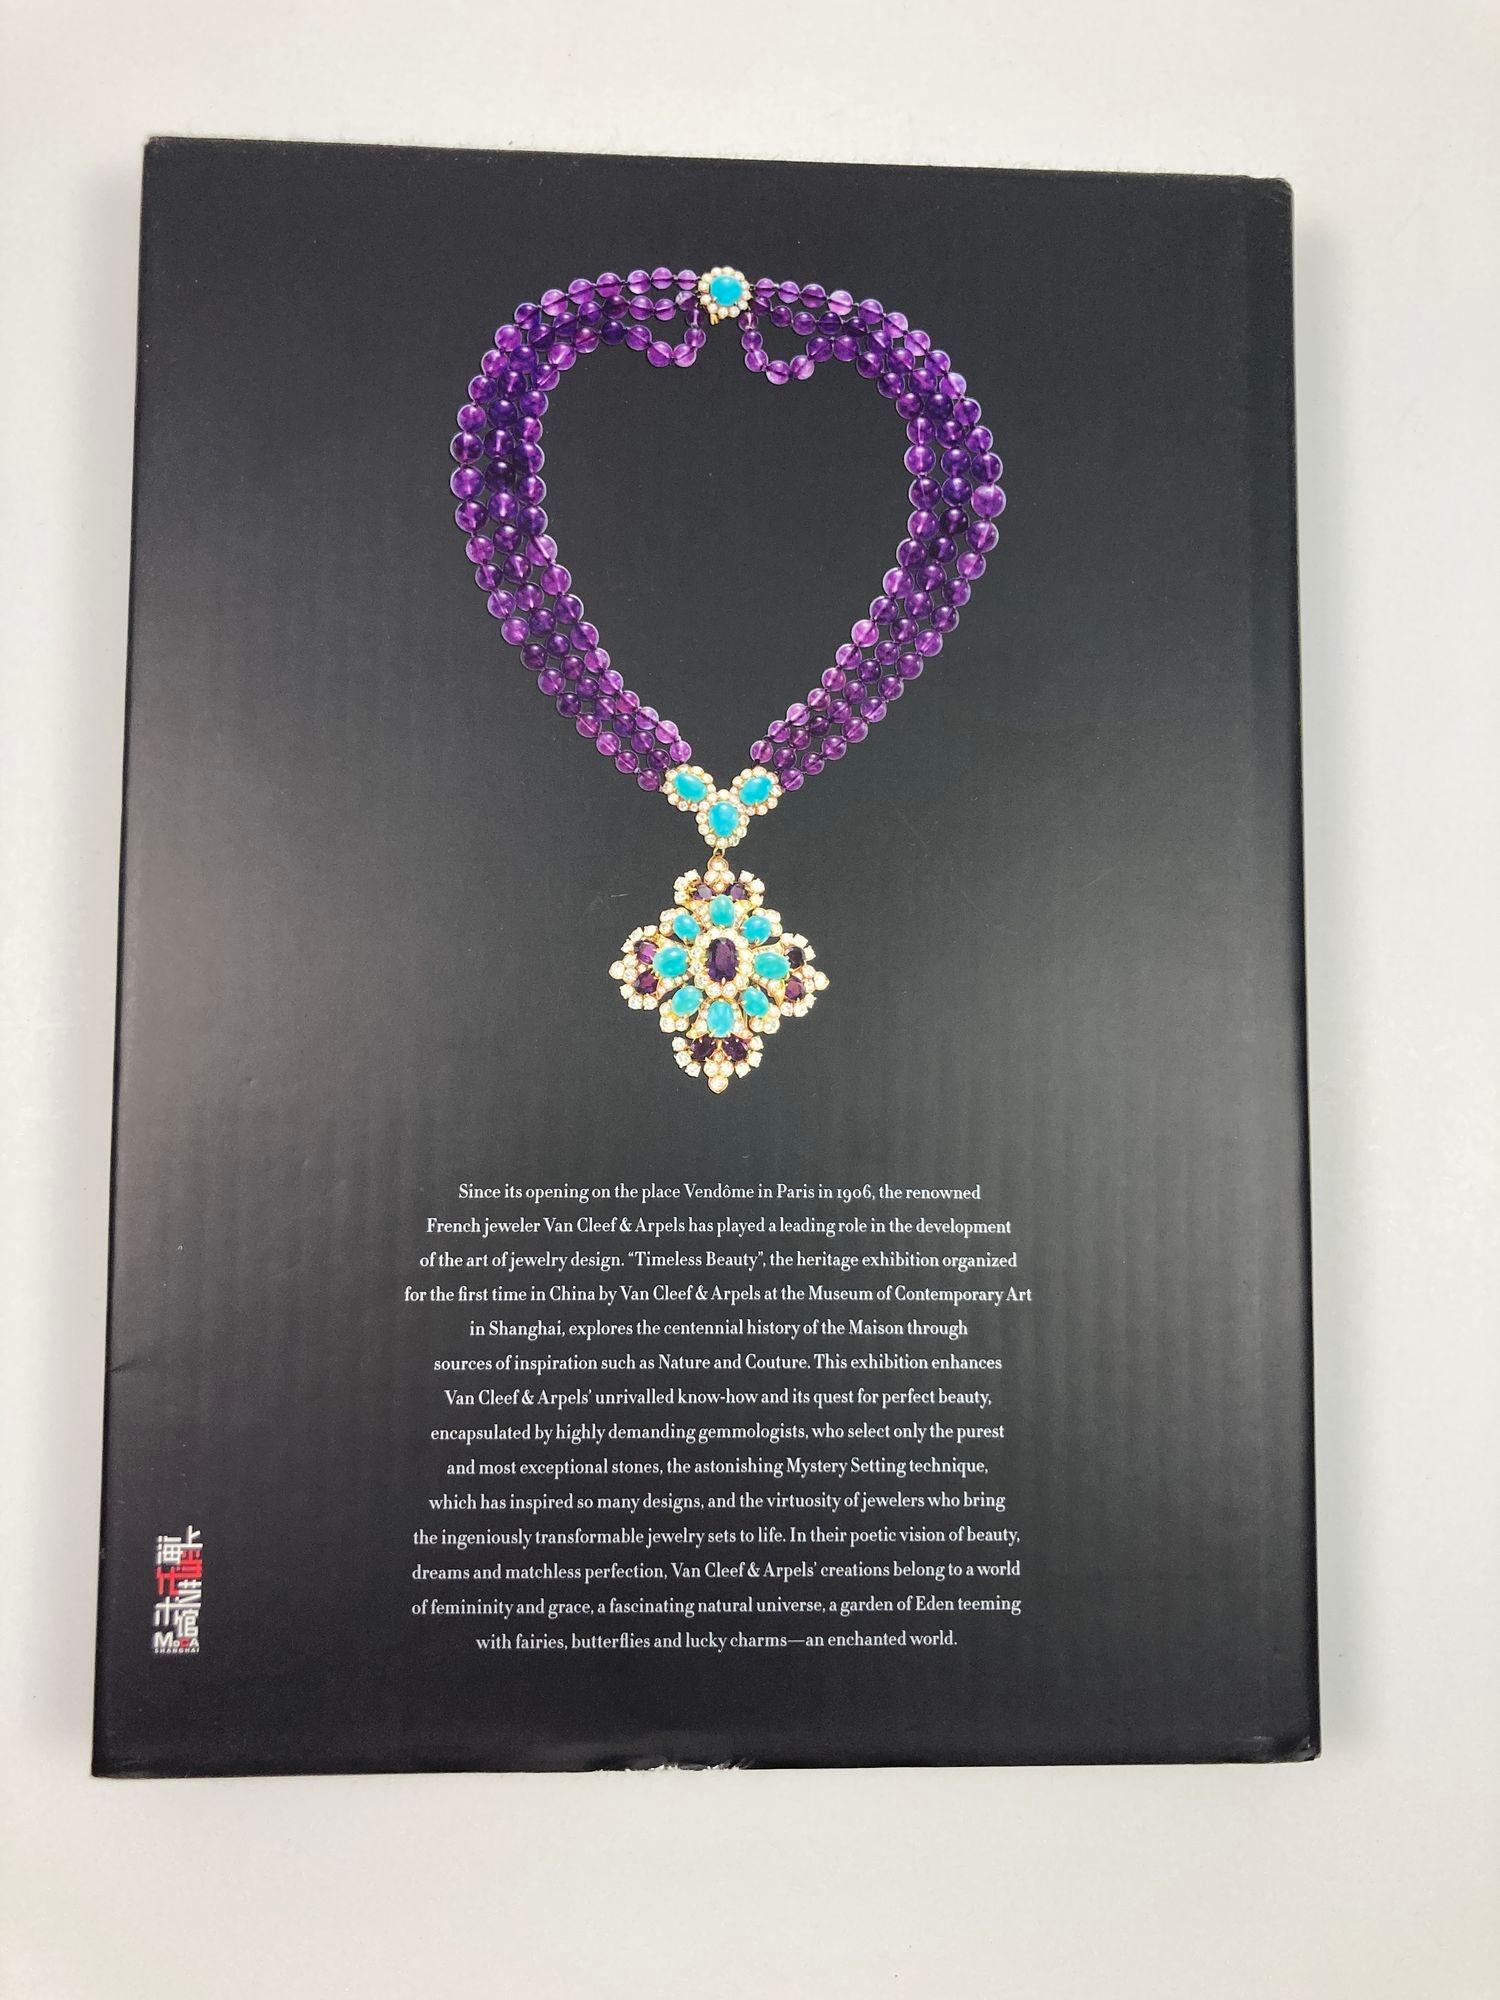 Van Cleef & Arpels: Timeless Beauty Hardcover Book 2012 In Good Condition For Sale In North Hollywood, CA